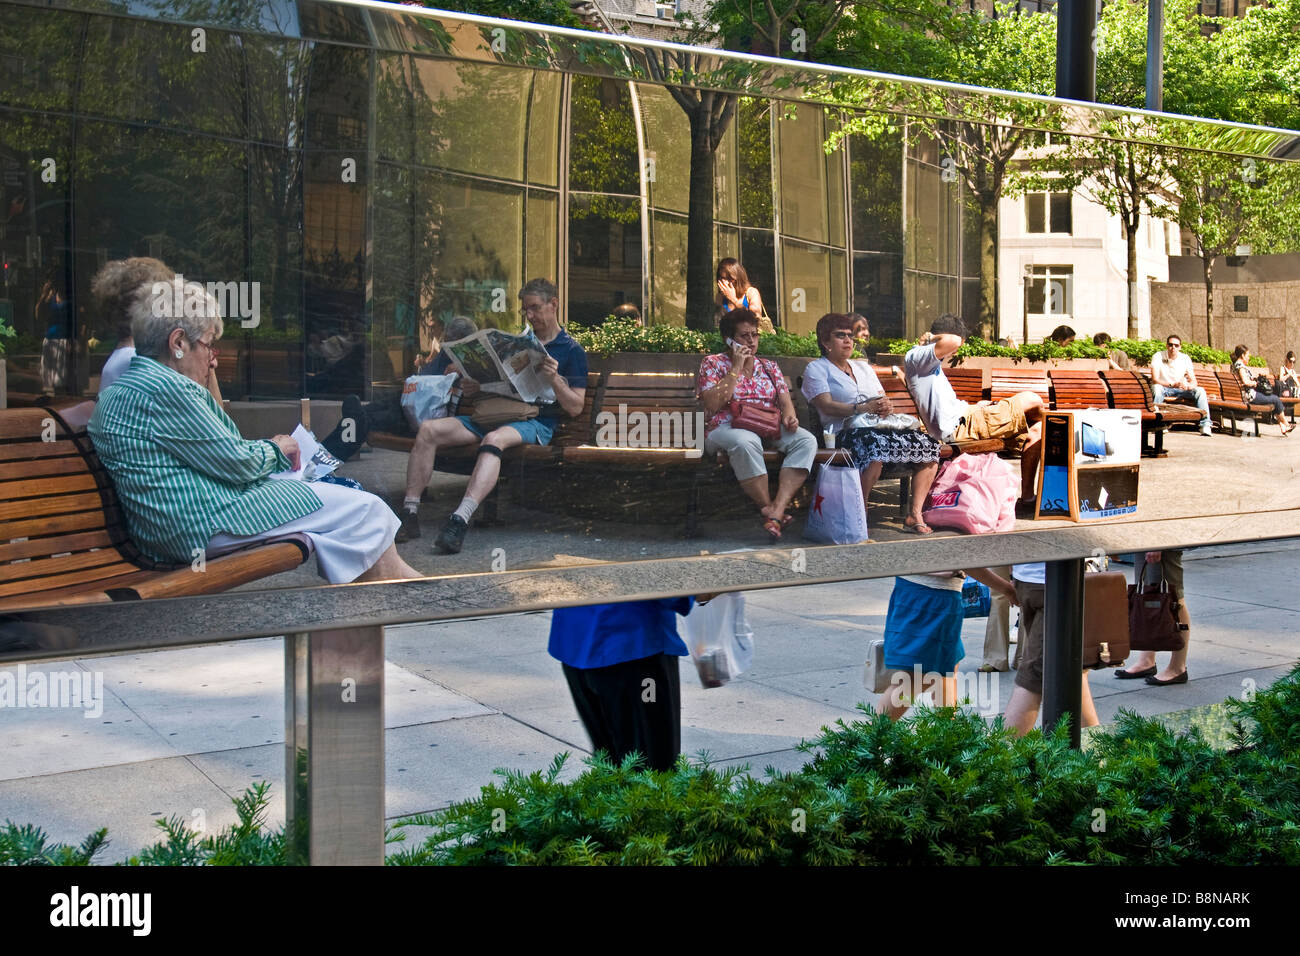 Urban scene with people sitting on benches Stock Photo